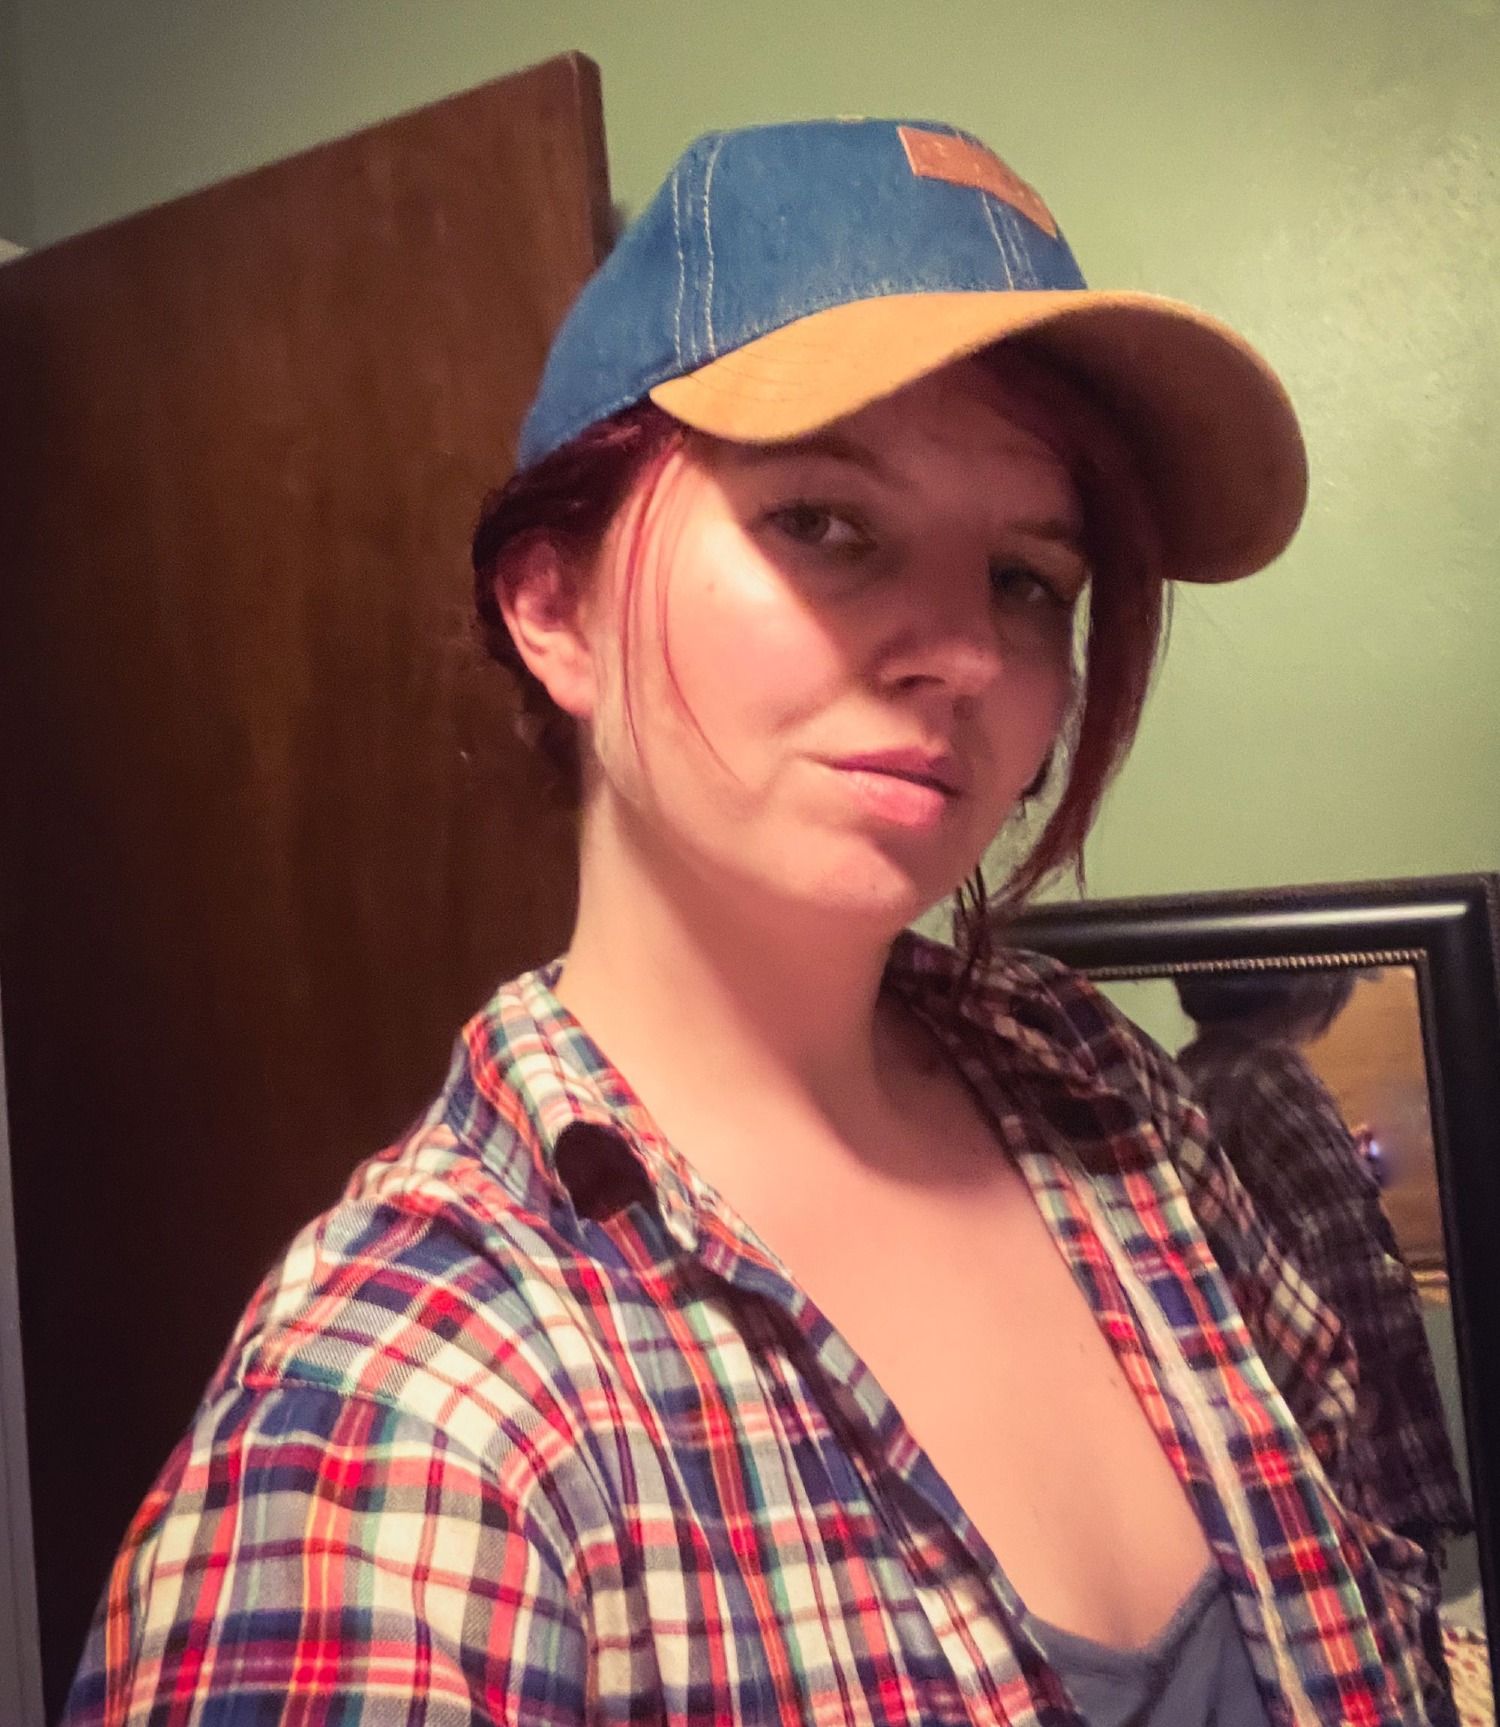 White woman wearing a hat and red plaid shirt